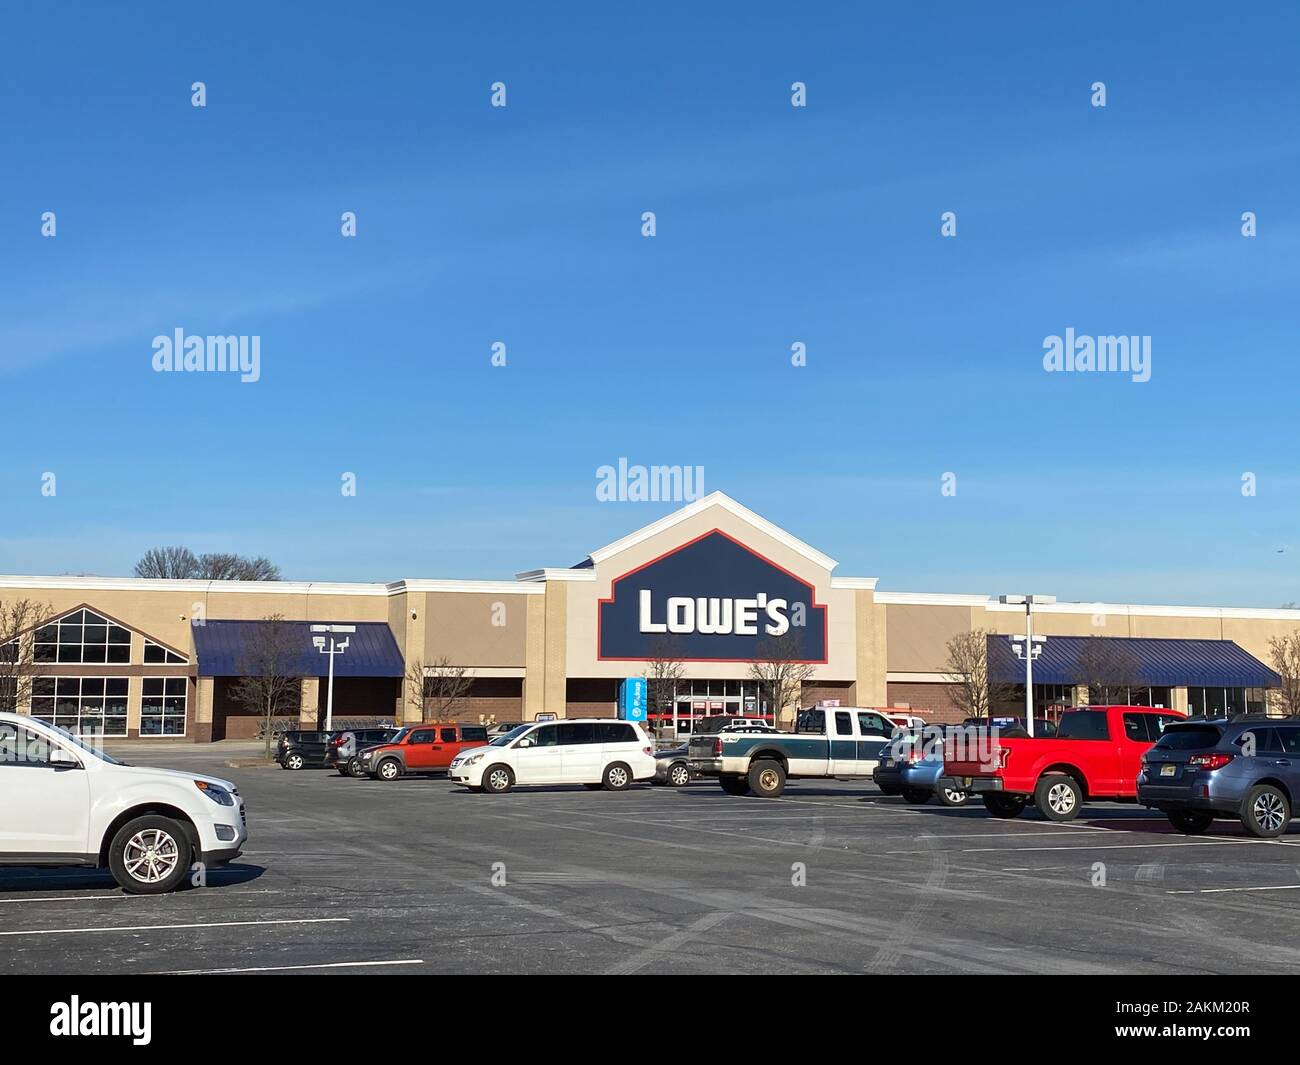 WOODBRIDGE, NEW JERSEY / UNITED STATES - January 9, 2020: the front  entrance to the Lowe's store in the Woodbridge Crossings shopping center  Stock Photo - Alamy